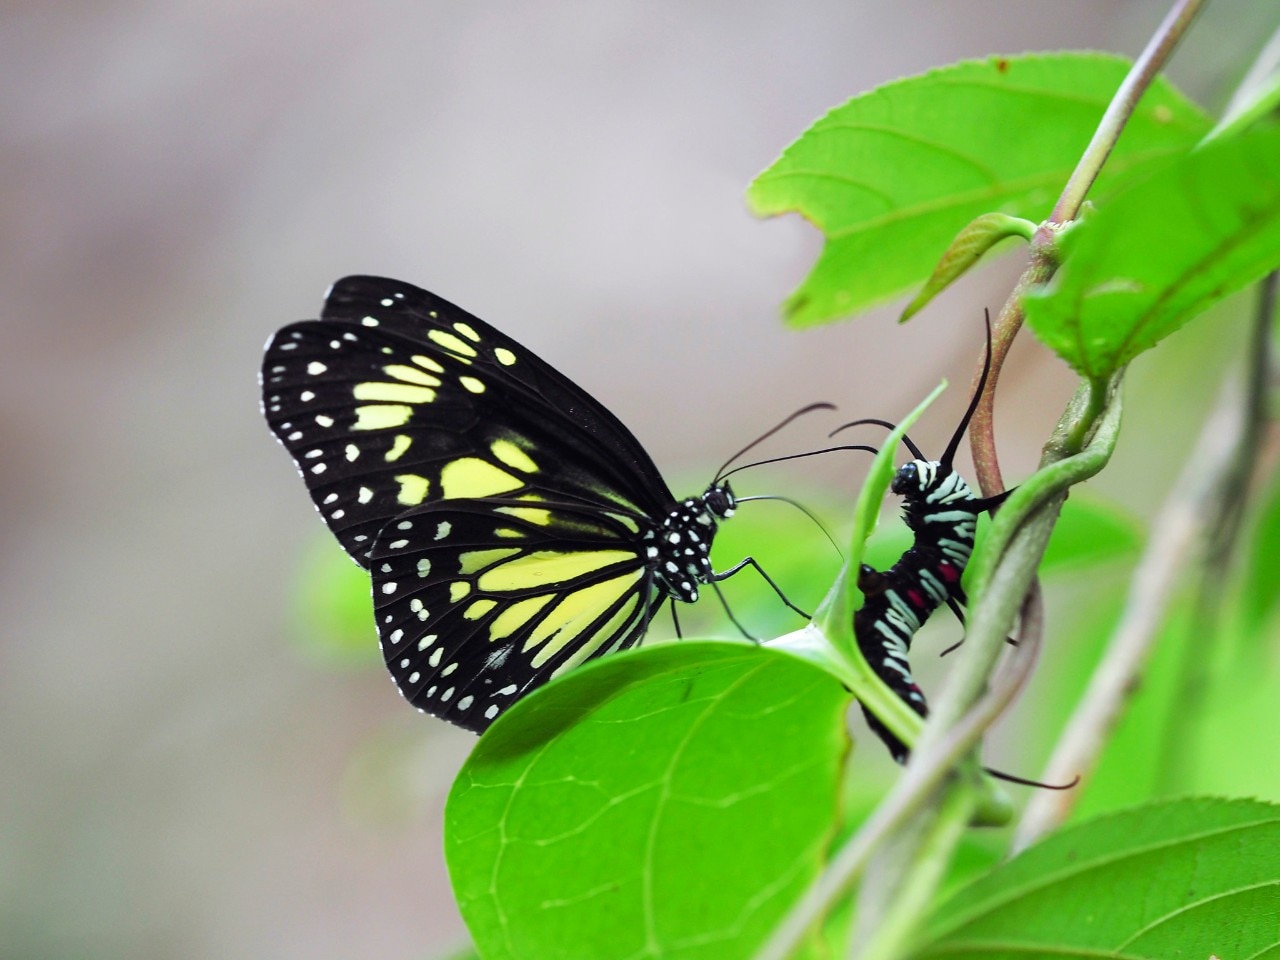 Butterflies feed on live young to steal chemicals for 'wedding gifts' | Mirage News